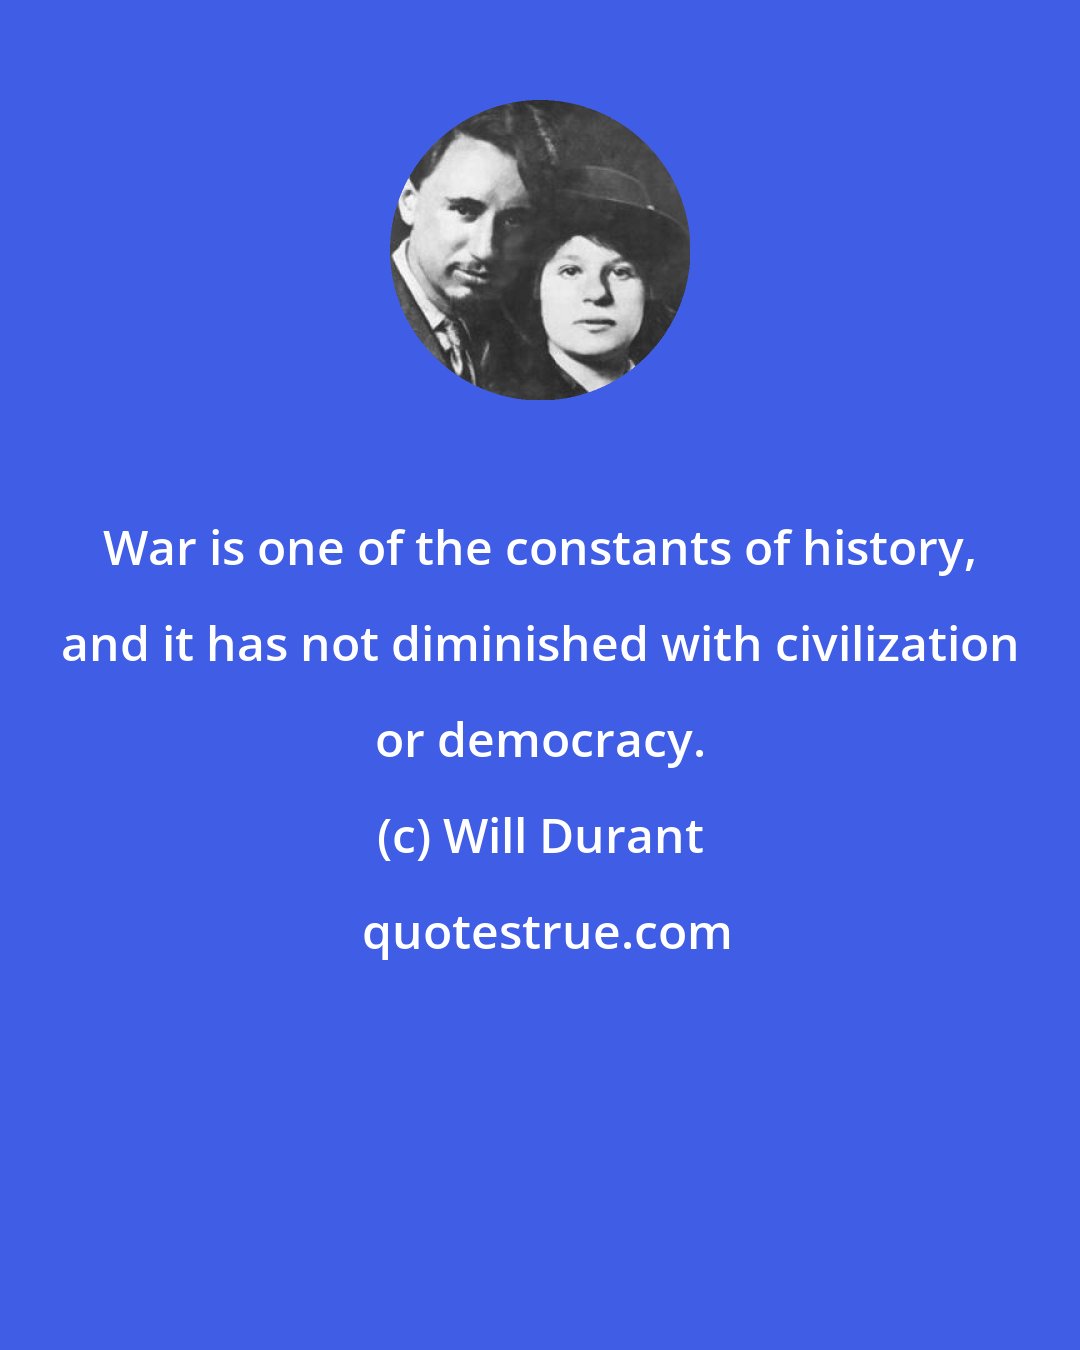 Will Durant: War is one of the constants of history, and it has not diminished with civilization or democracy.